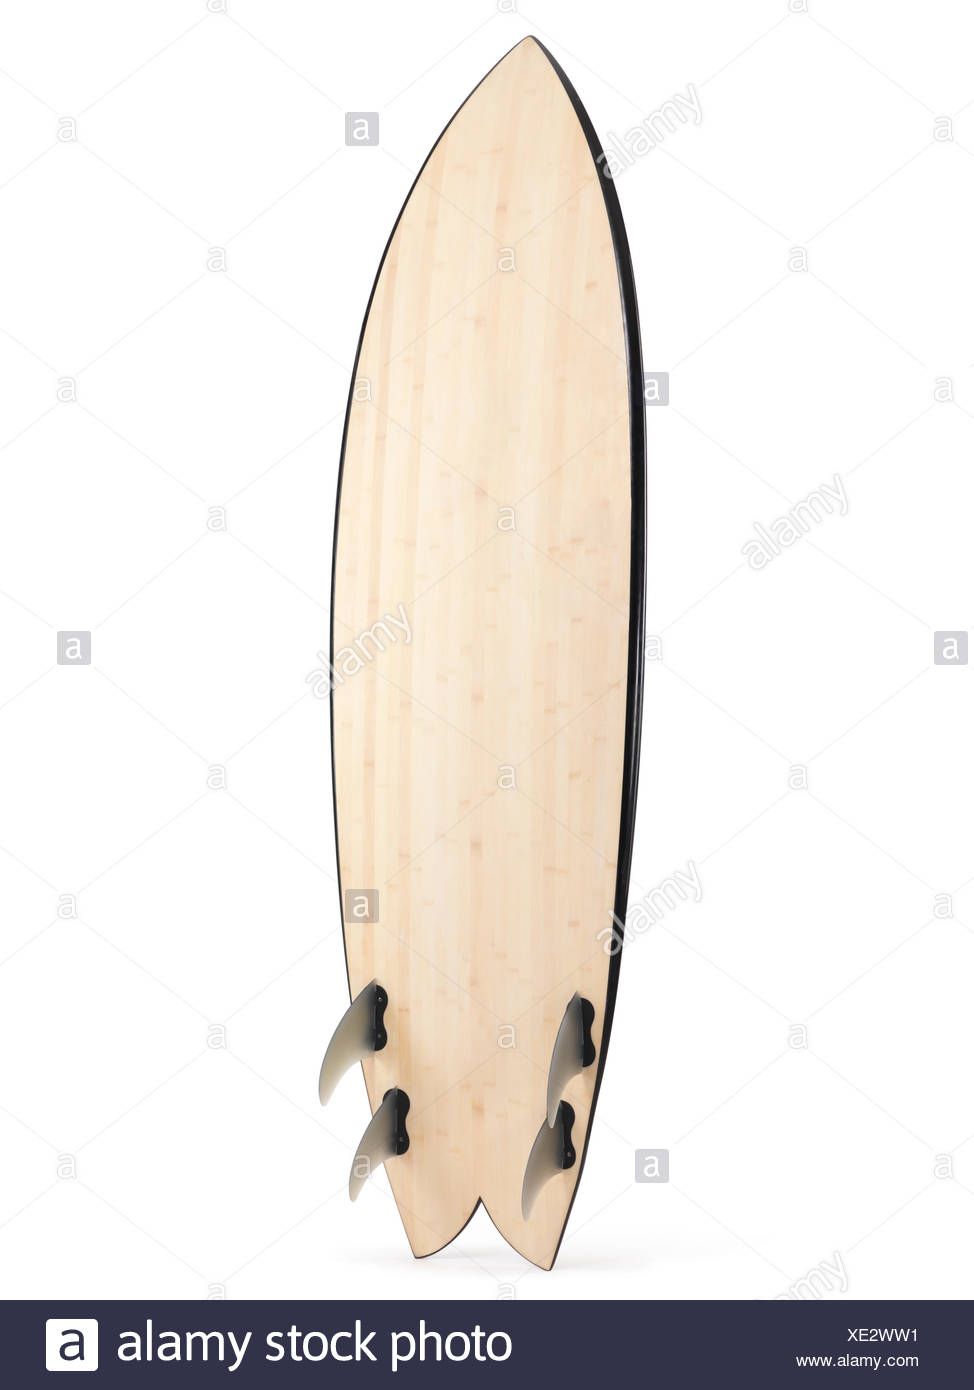 Download Surfboard Bottom Side Showing Fins Stock Photo Alamy Yellowimages Mockups